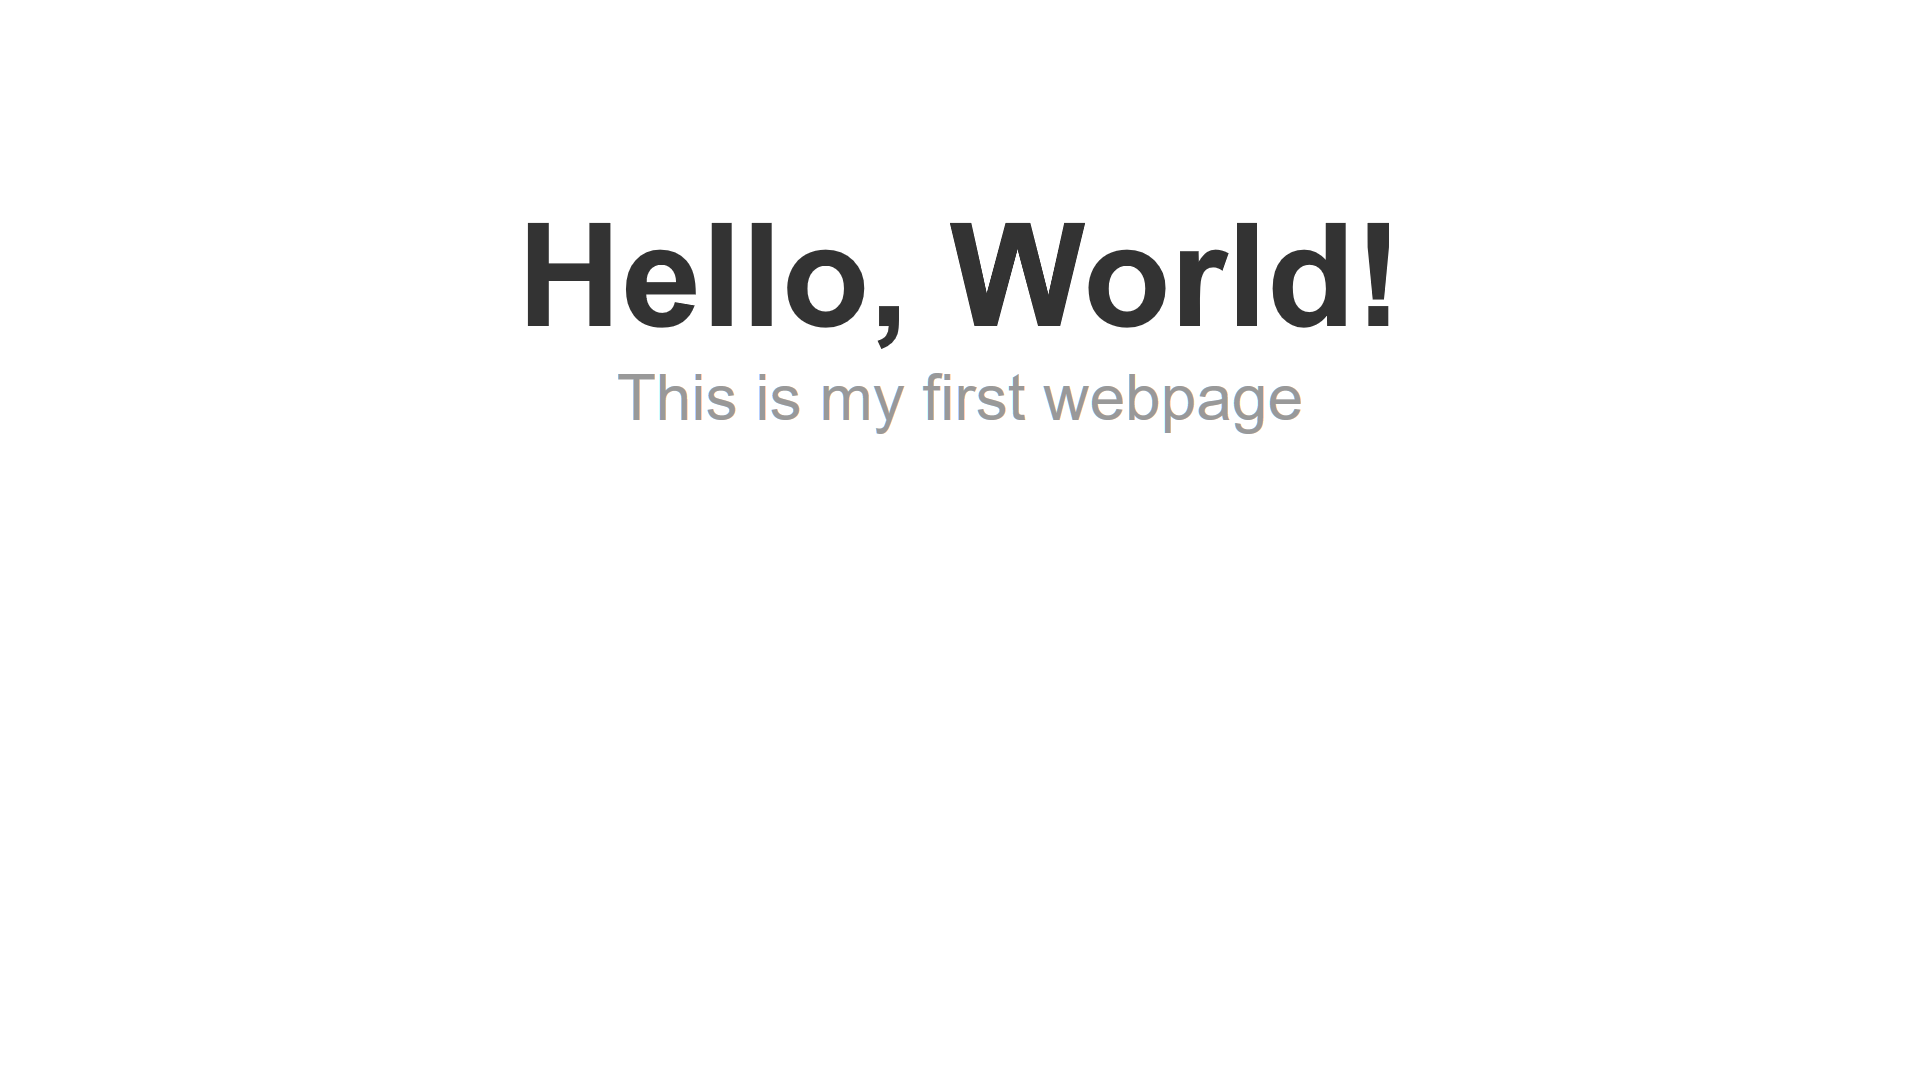 The completed Hello, World! webpage